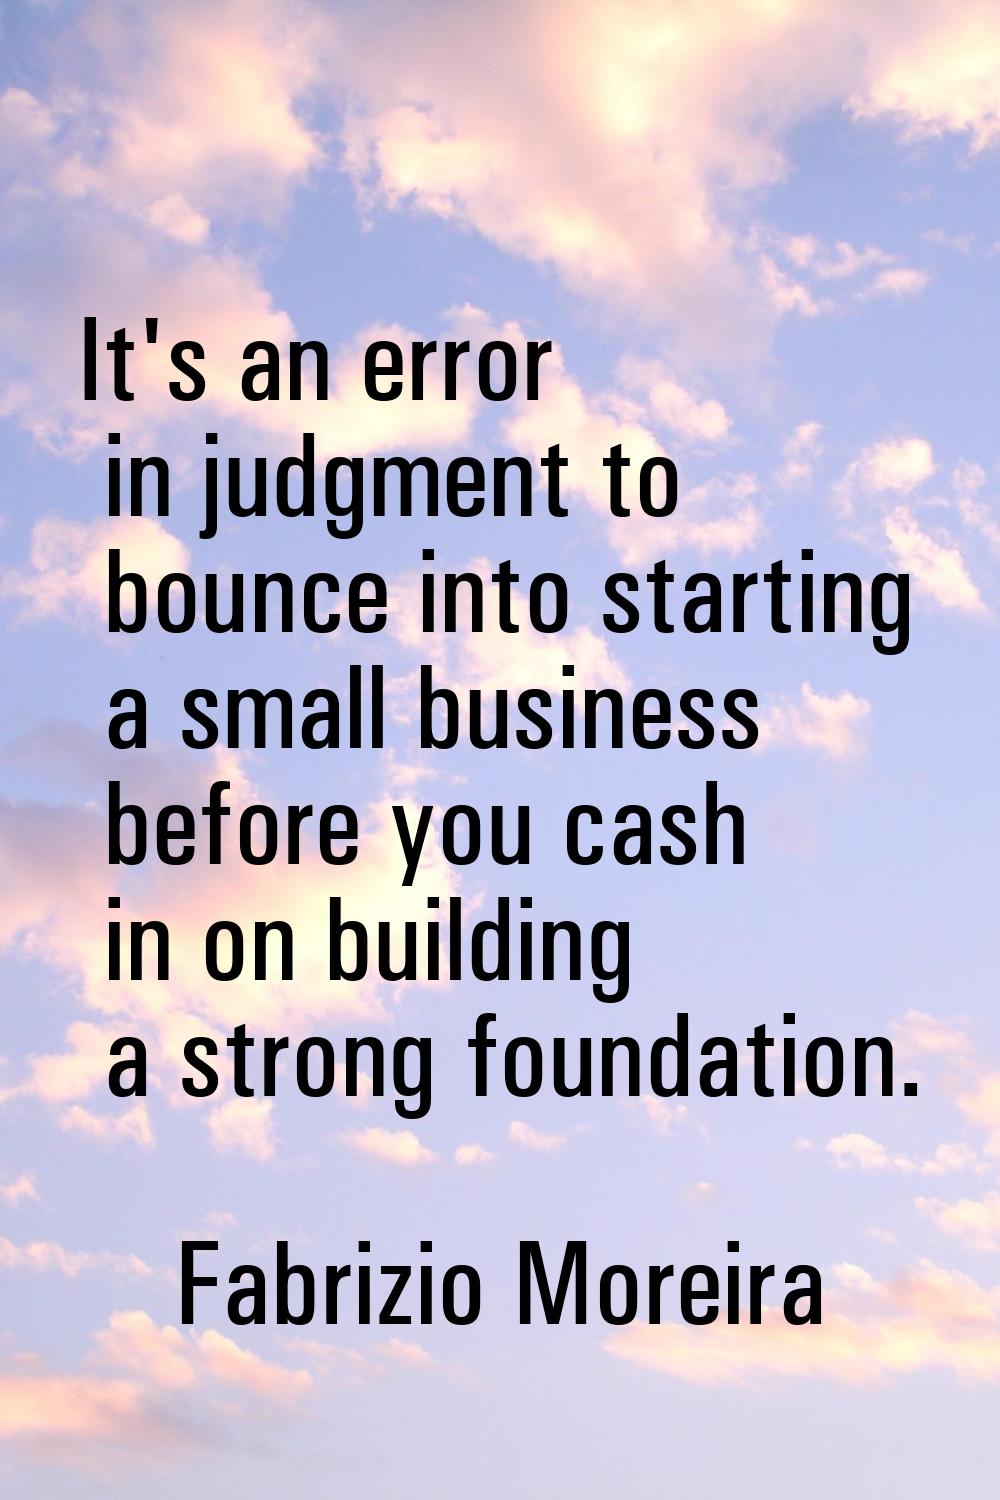 It's an error in judgment to bounce into starting a small business before you cash in on building a